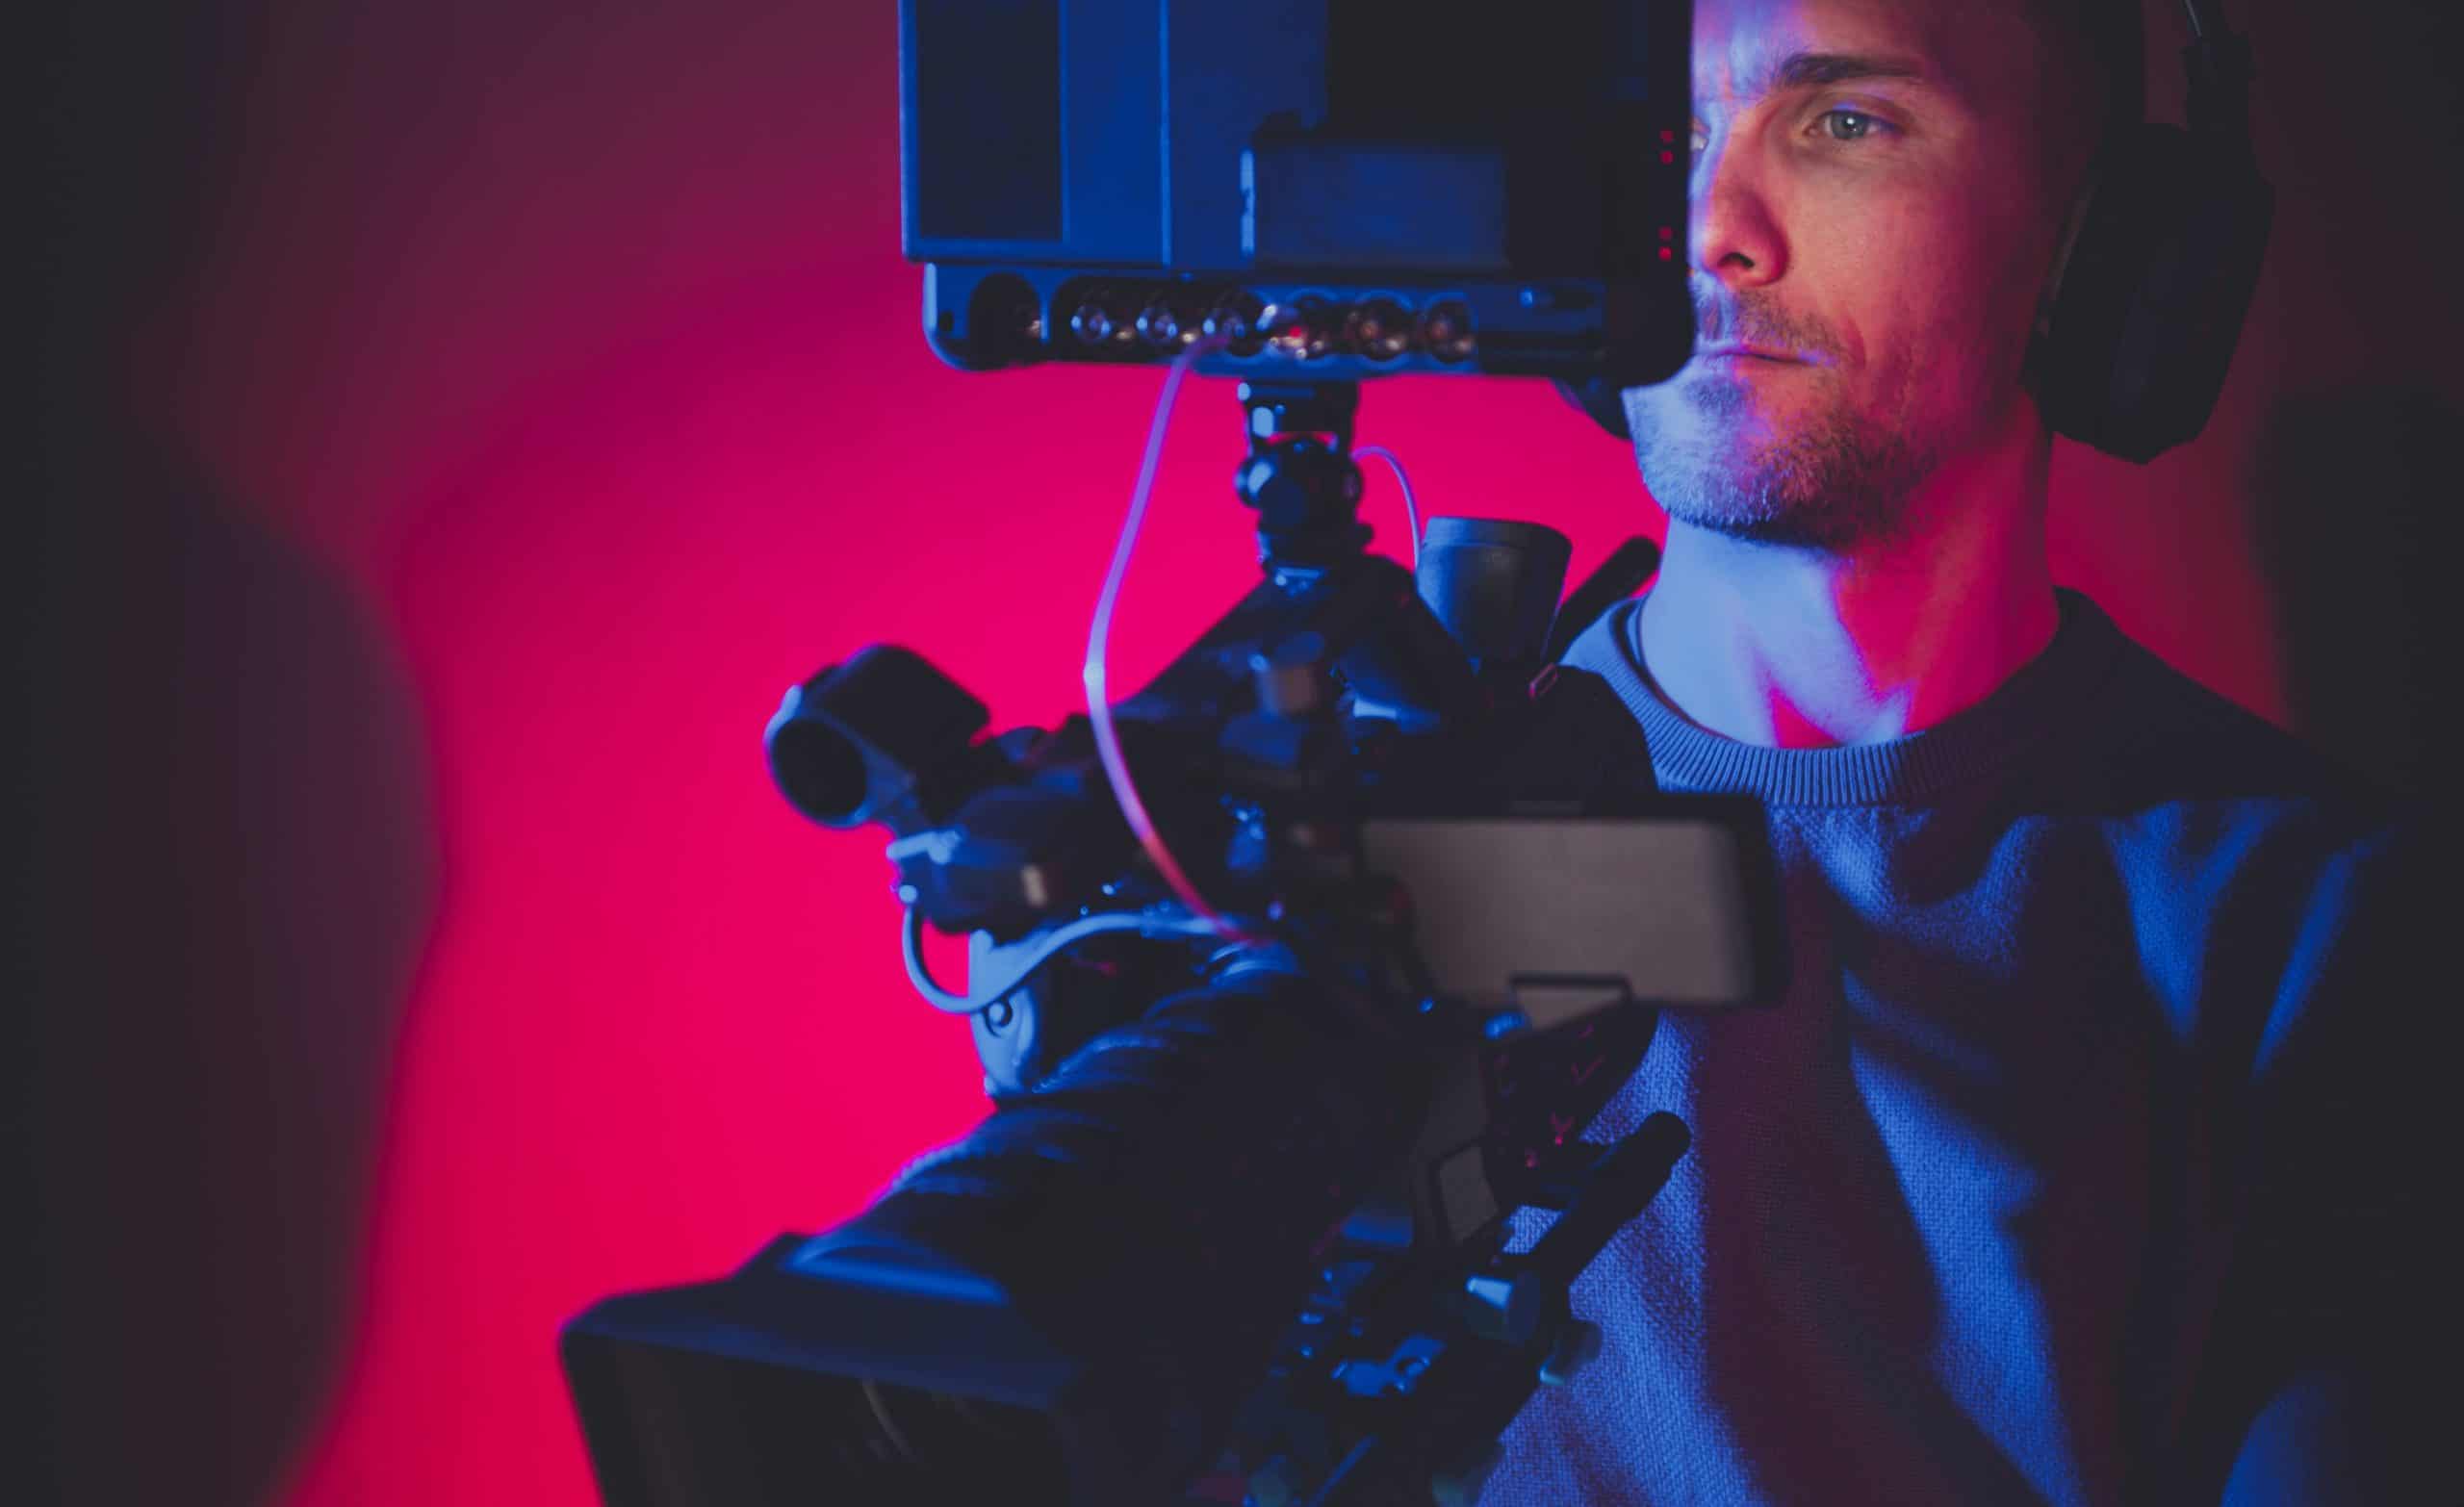 How to find remote film jobs